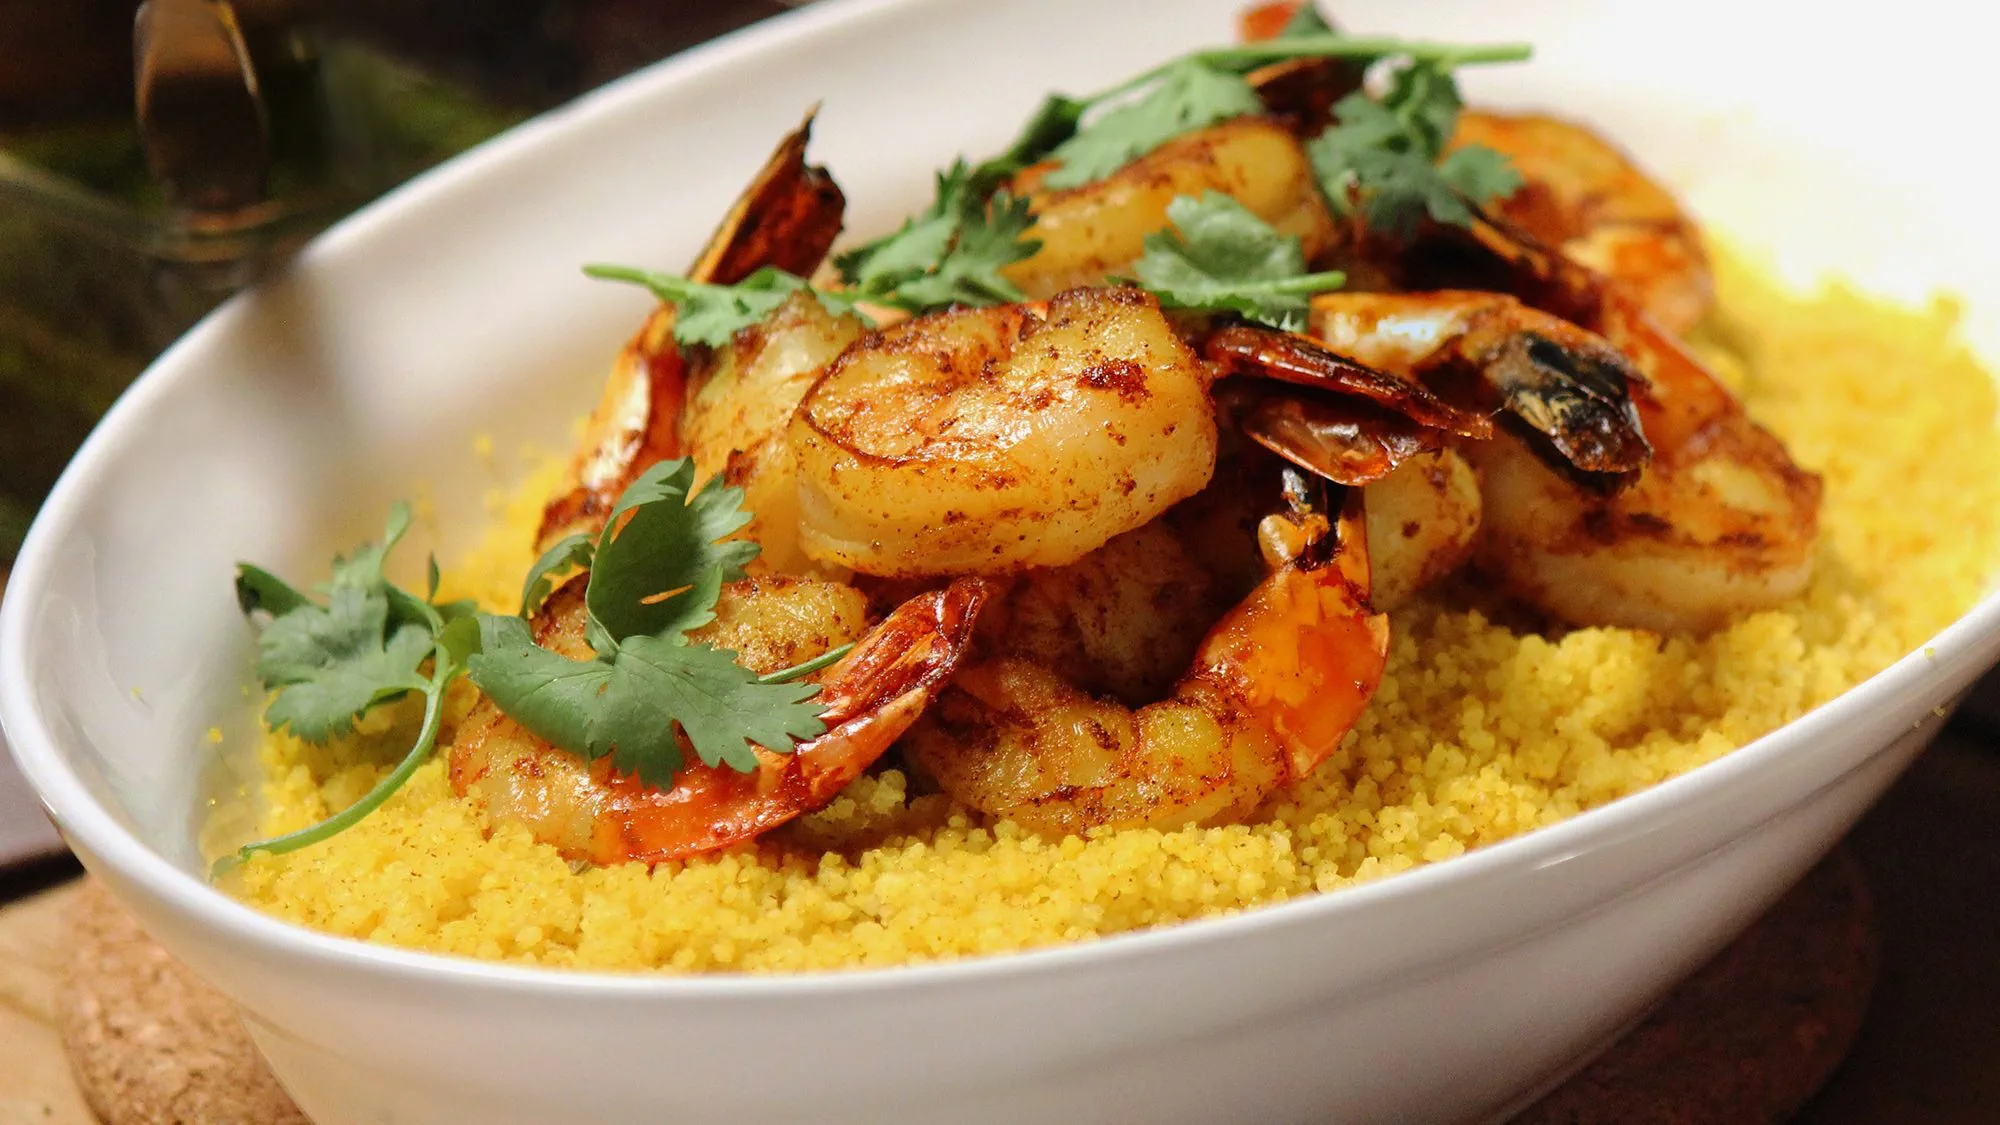 SPICED COUSCOUS WITH SHRIMP AND CHERMOULA